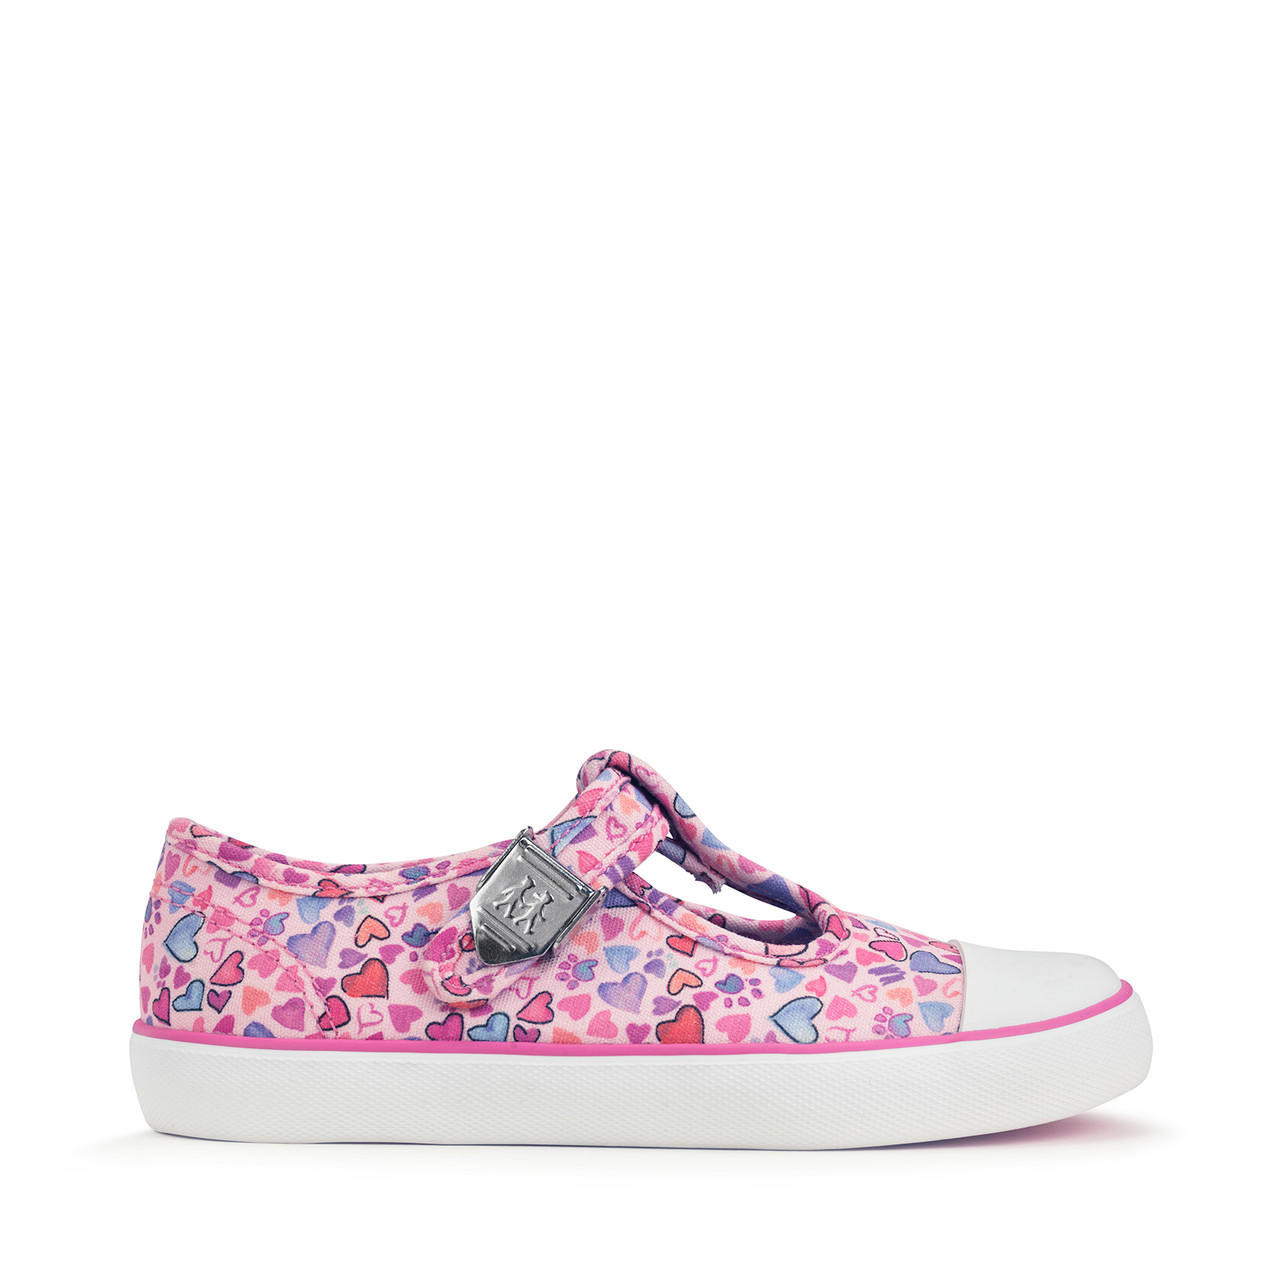 Sweets, Pink heart print girls t-bar buckle canvas